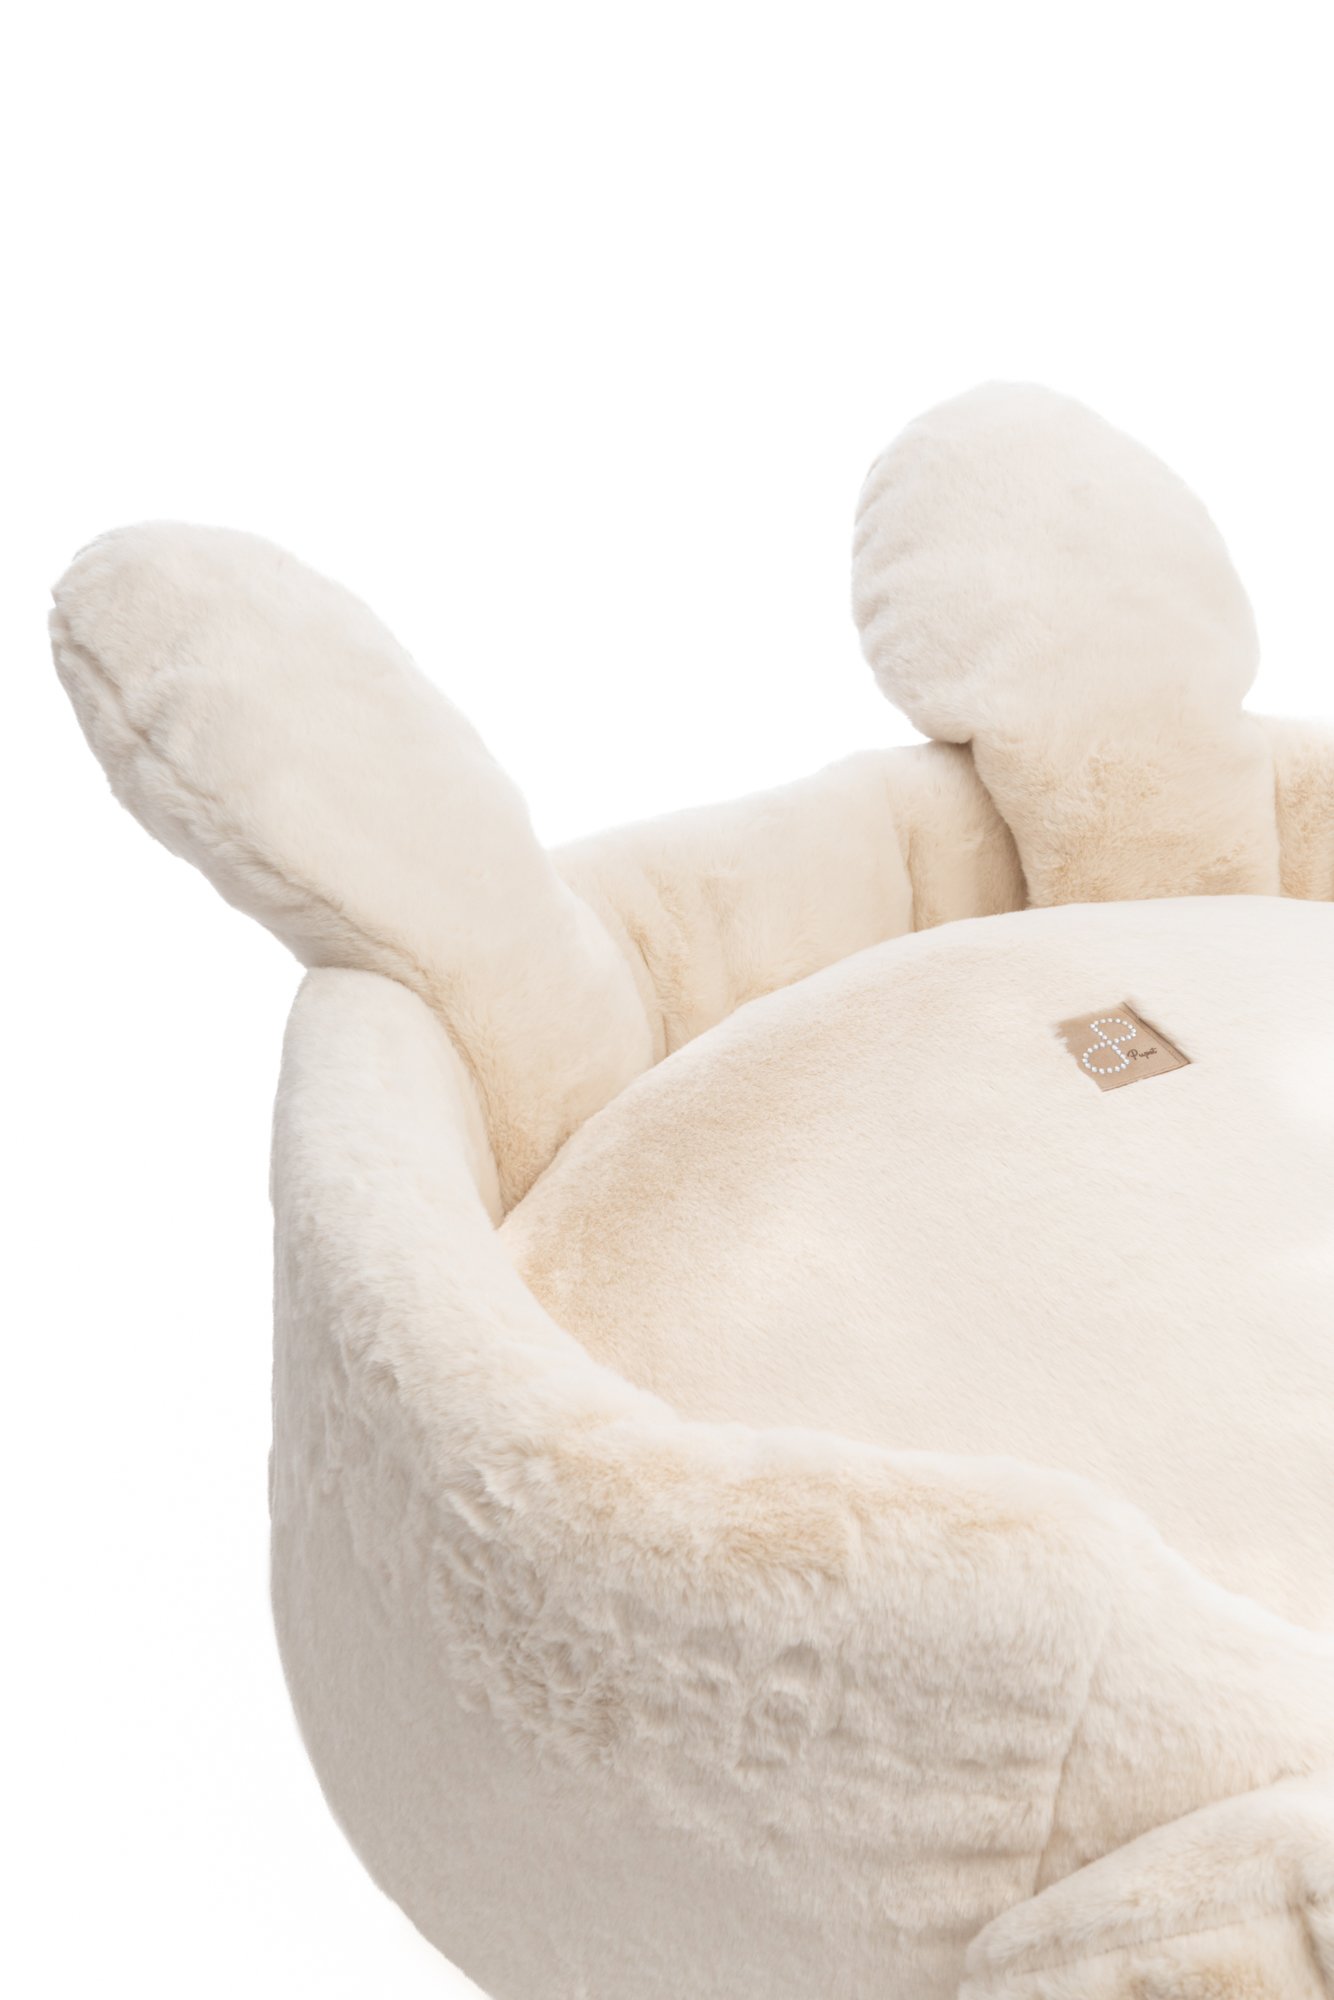 FUR DOG BED WITH RABBIT EARS